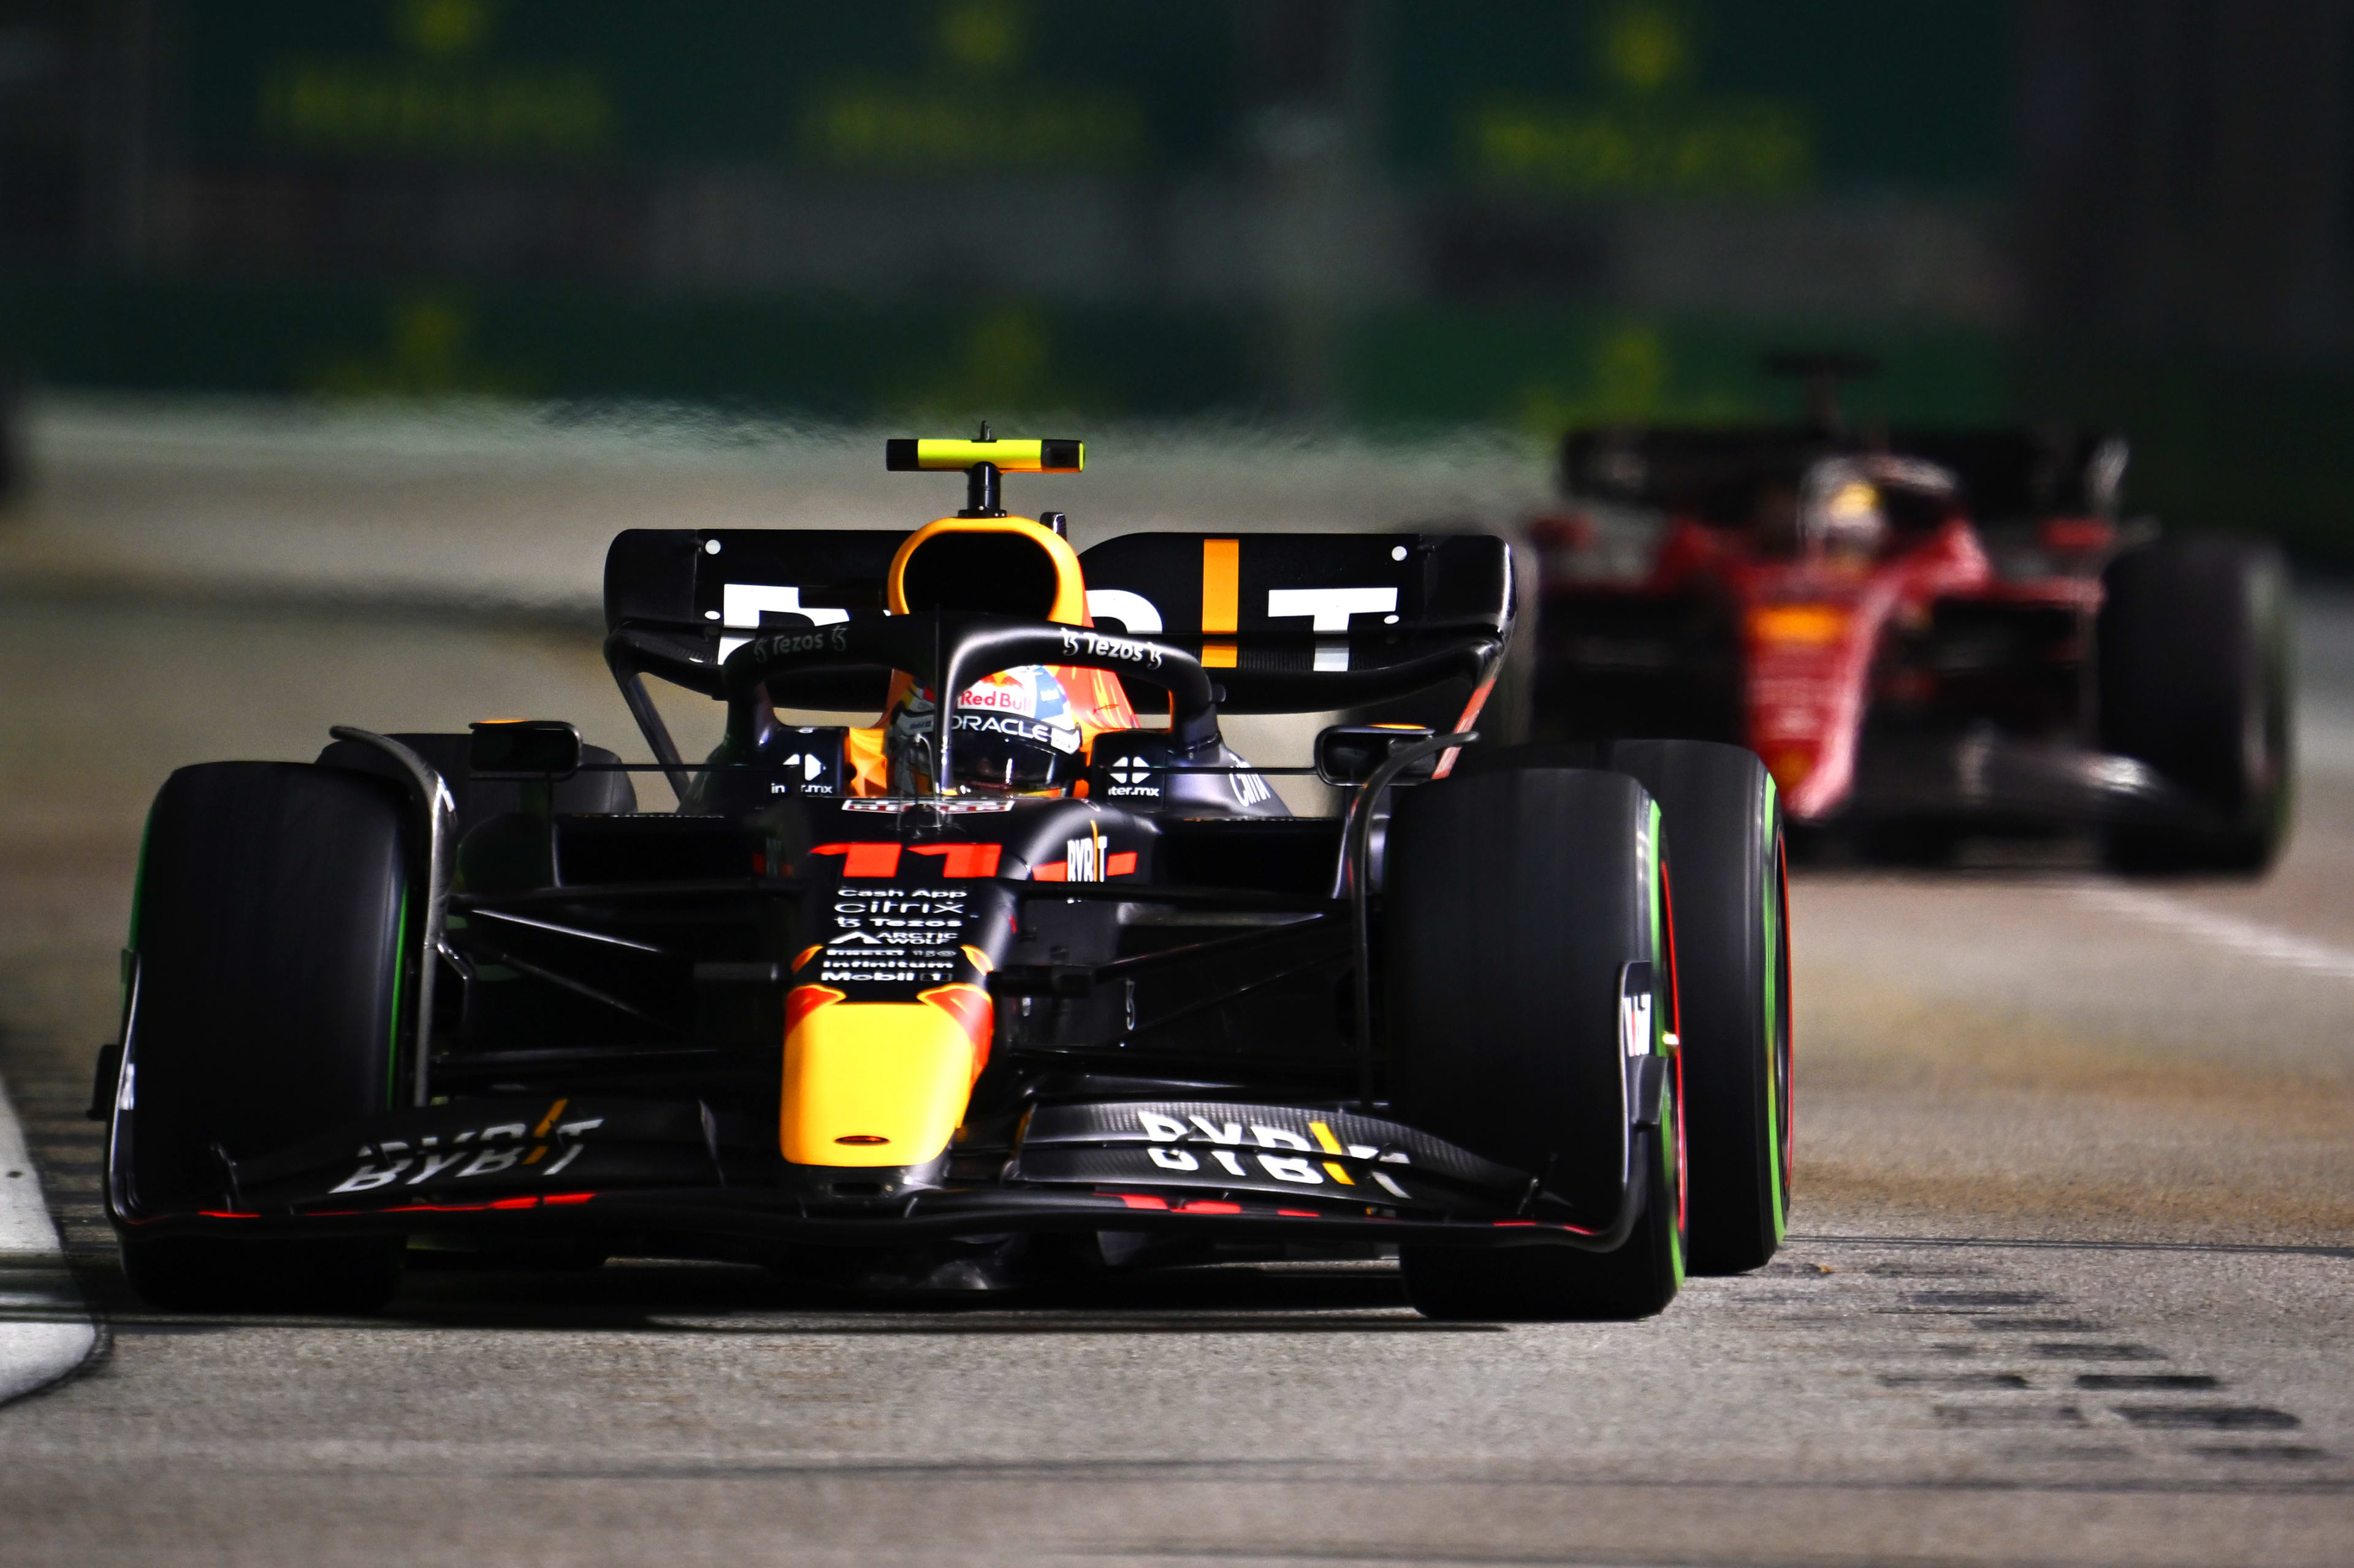 Perez holds off Leclerc to win rollercoaster 2022 Singapore Grand Prix as Verstappen settles for 7th - Formula 1 image